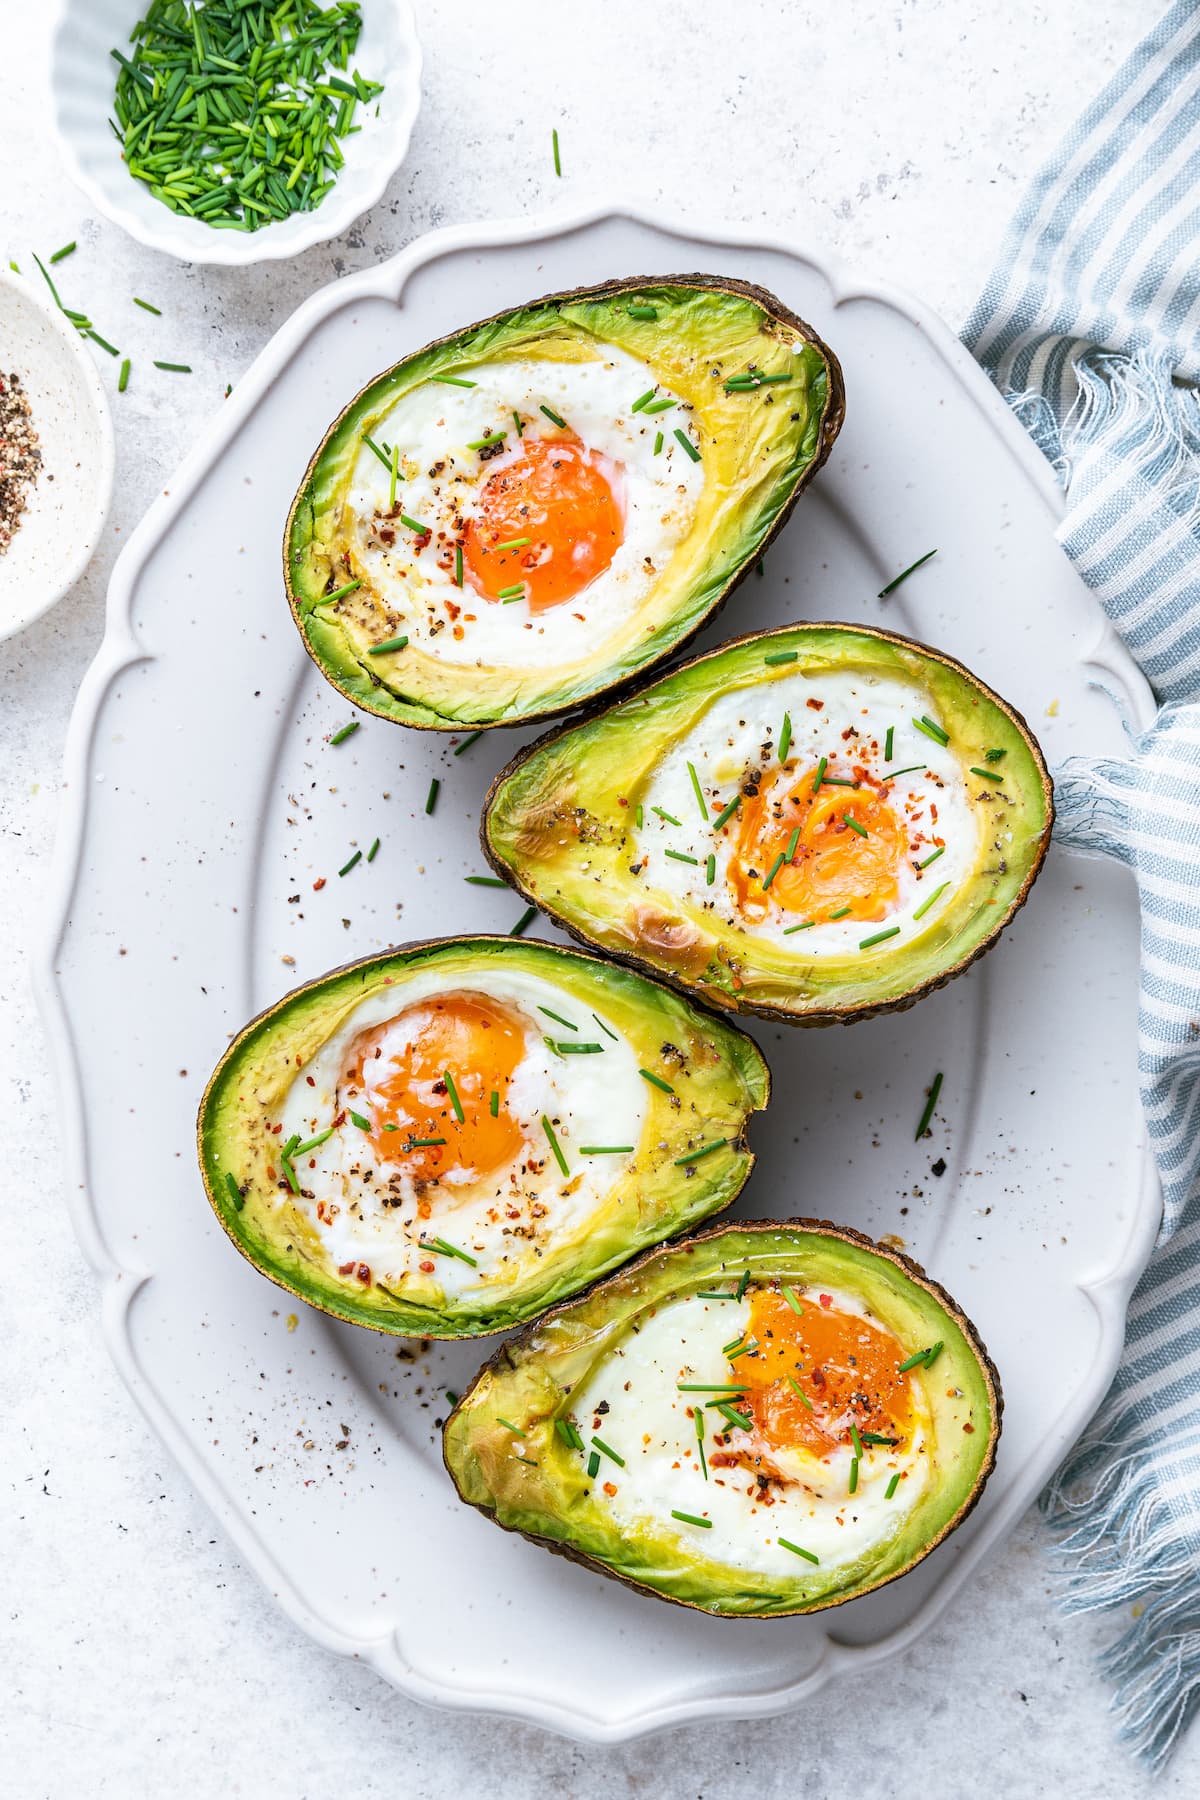 On a white plate, two halved avocados with an egg in the center, each recently baked.